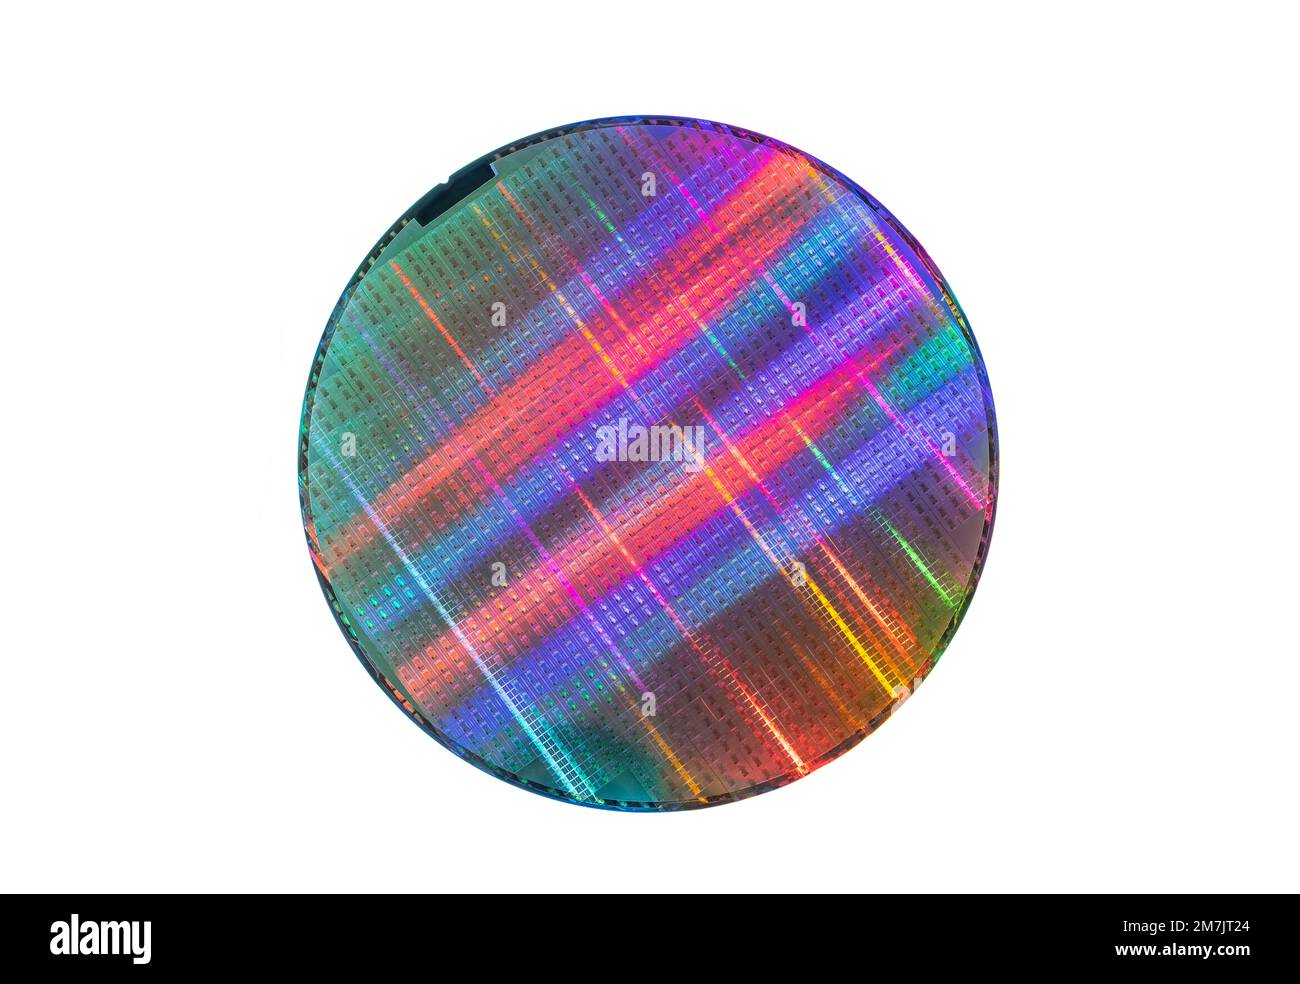 Semiconductor wafer disk made of silicon isolated on white Stock Photo